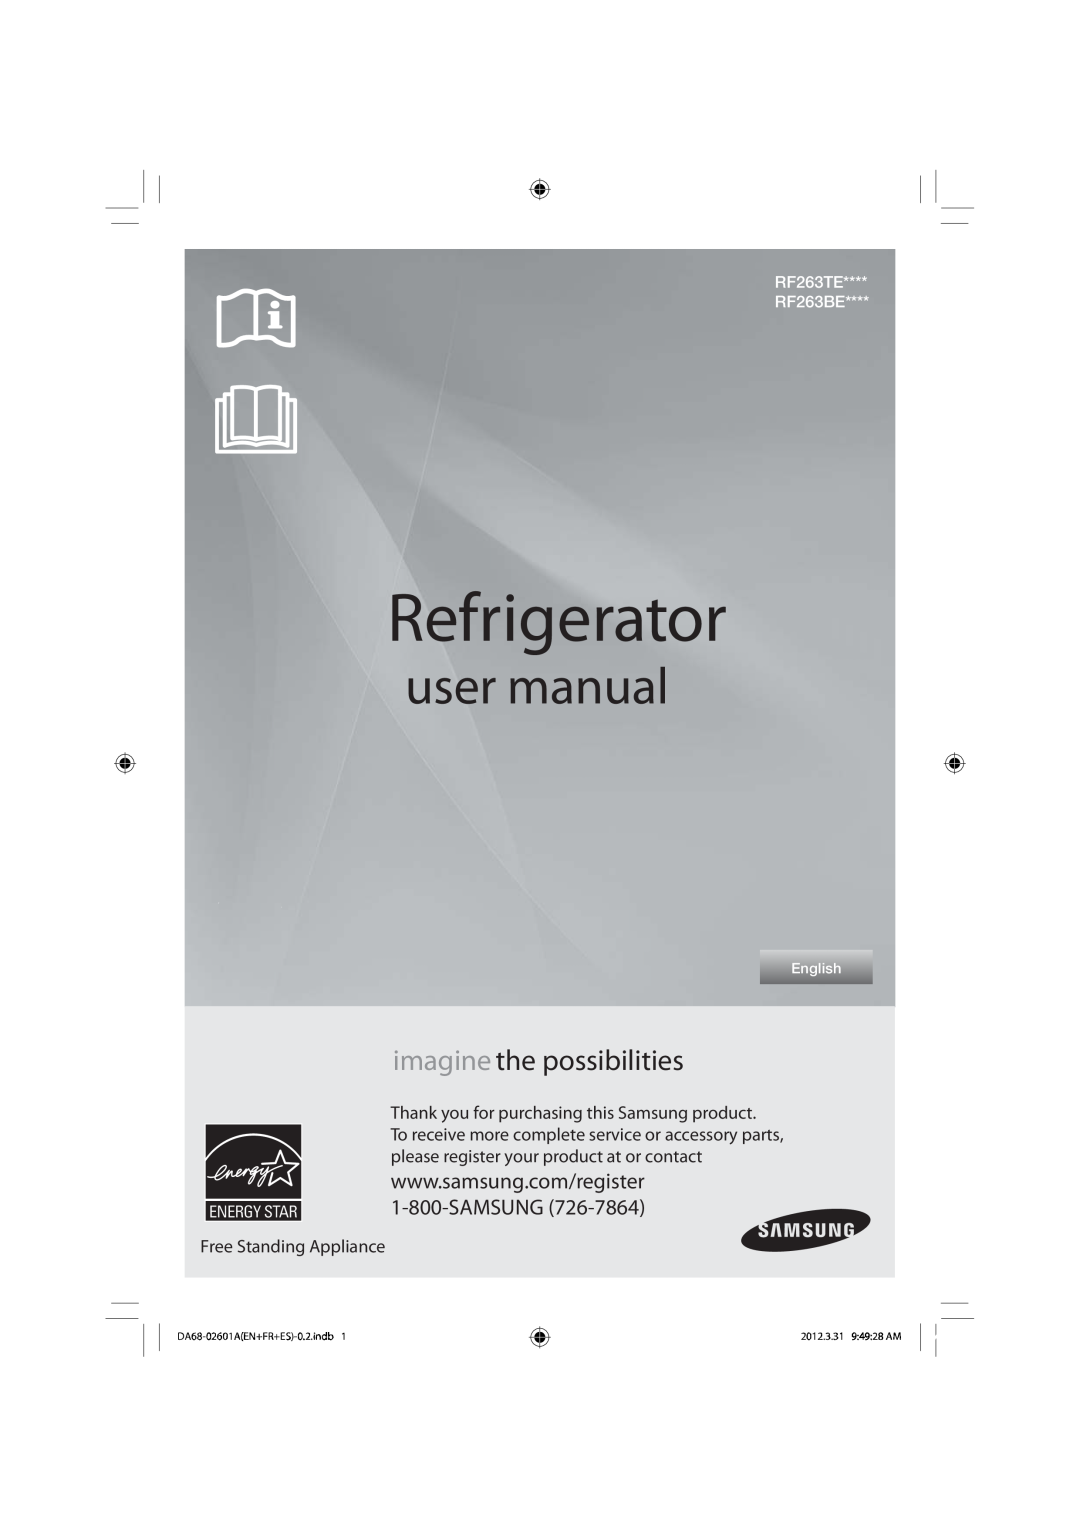 Samsung RF263BEAEBC user manual Refrigerator, imagine the possibilities, Thank you for purchasing this Samsung product 